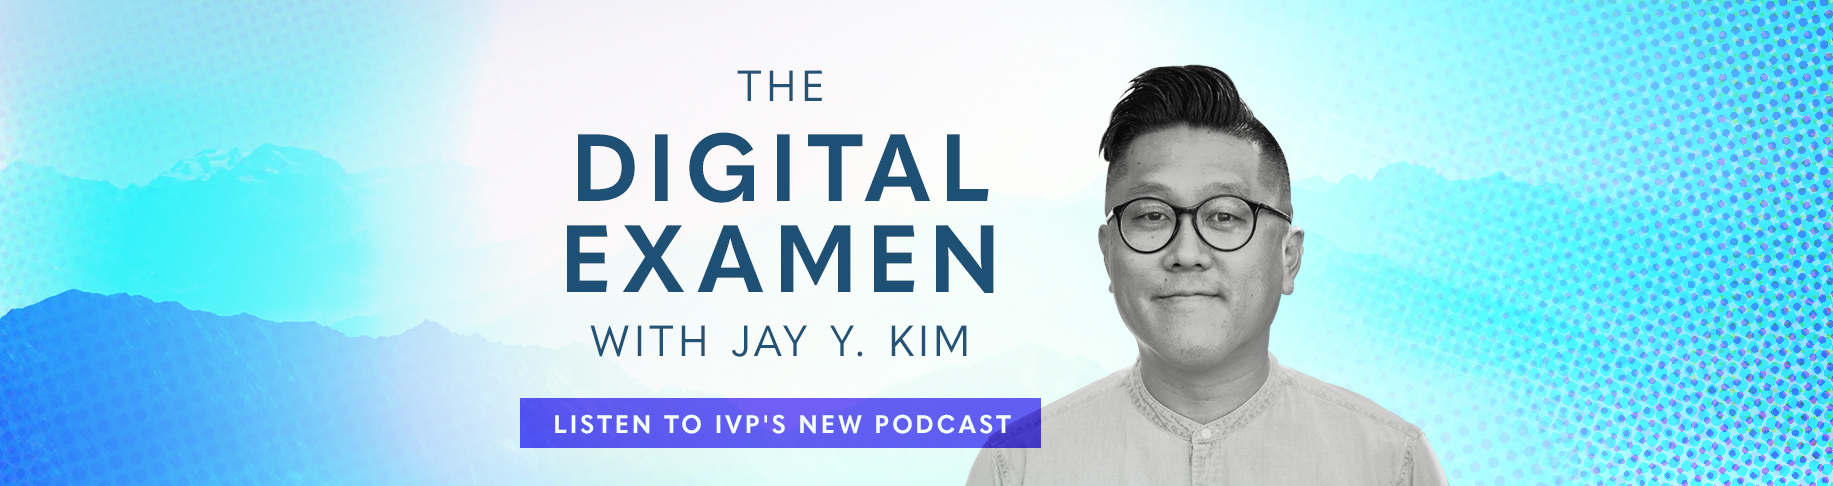 The Digital Examen with Jay Y. Kim - Listen to IVP's New Podcast